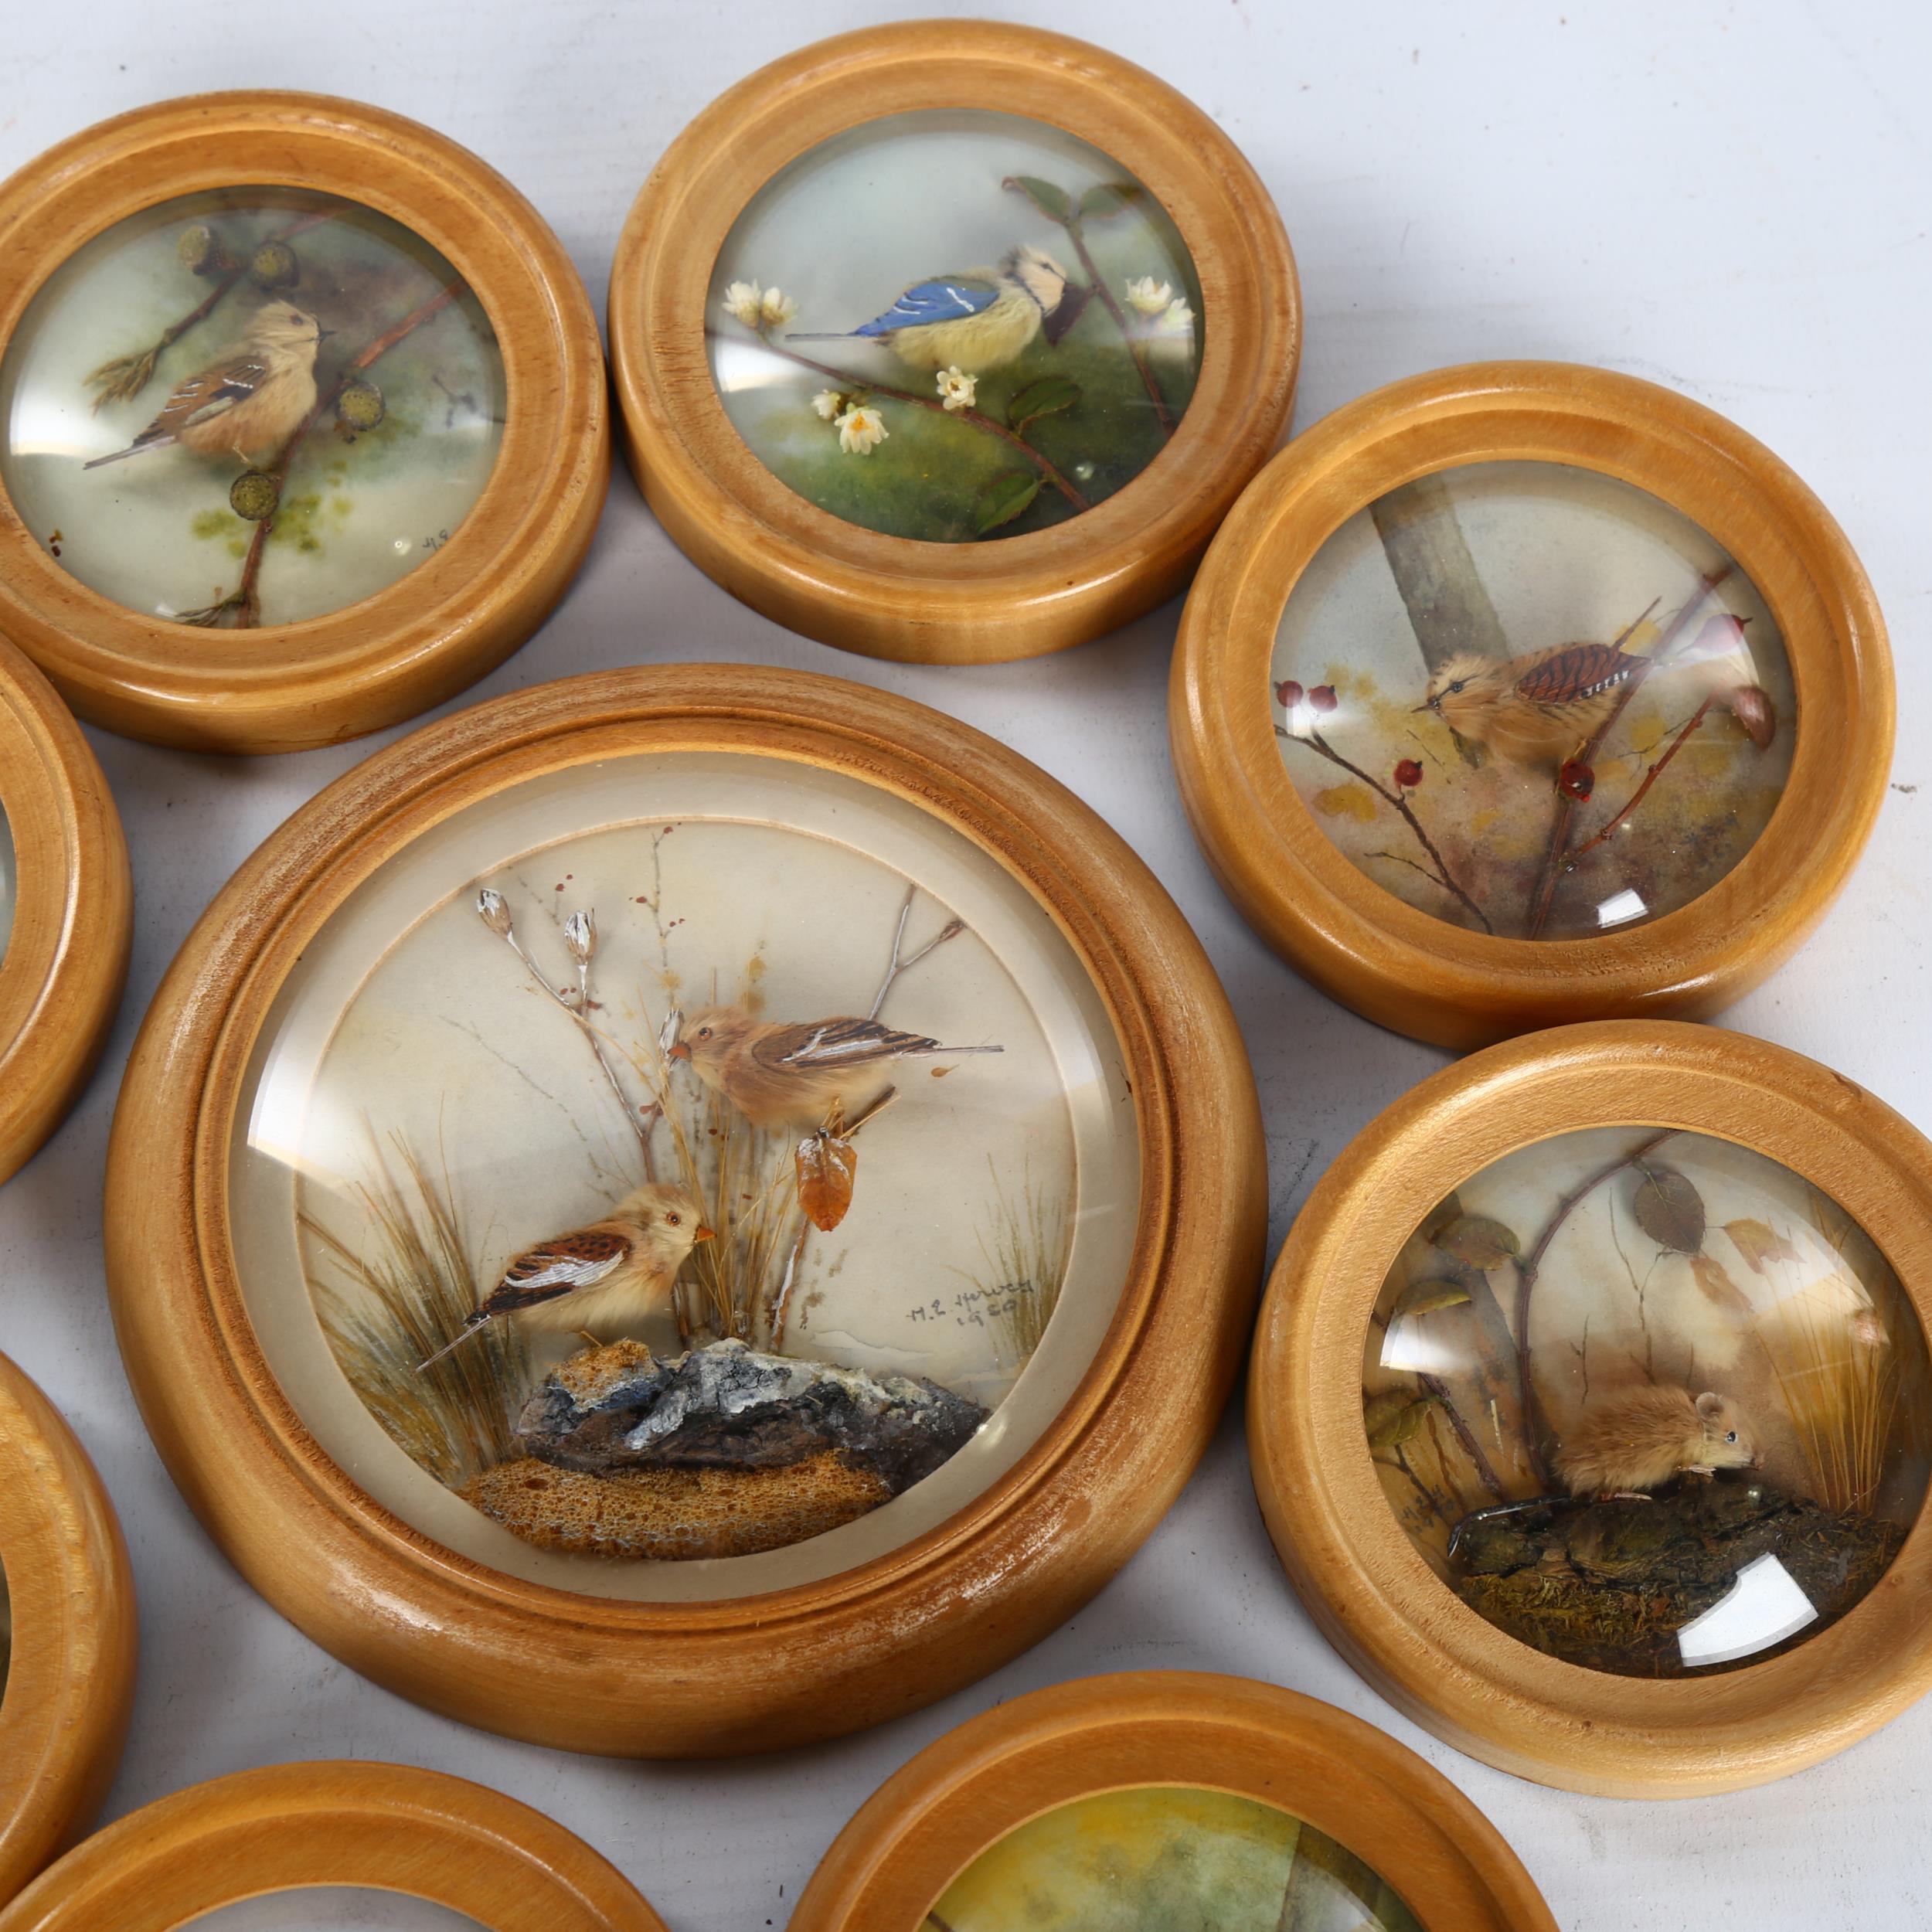 H E Hervey RMS, 10 miniature diorama pictures behind convex glass depicting garden birds, made - Image 3 of 3